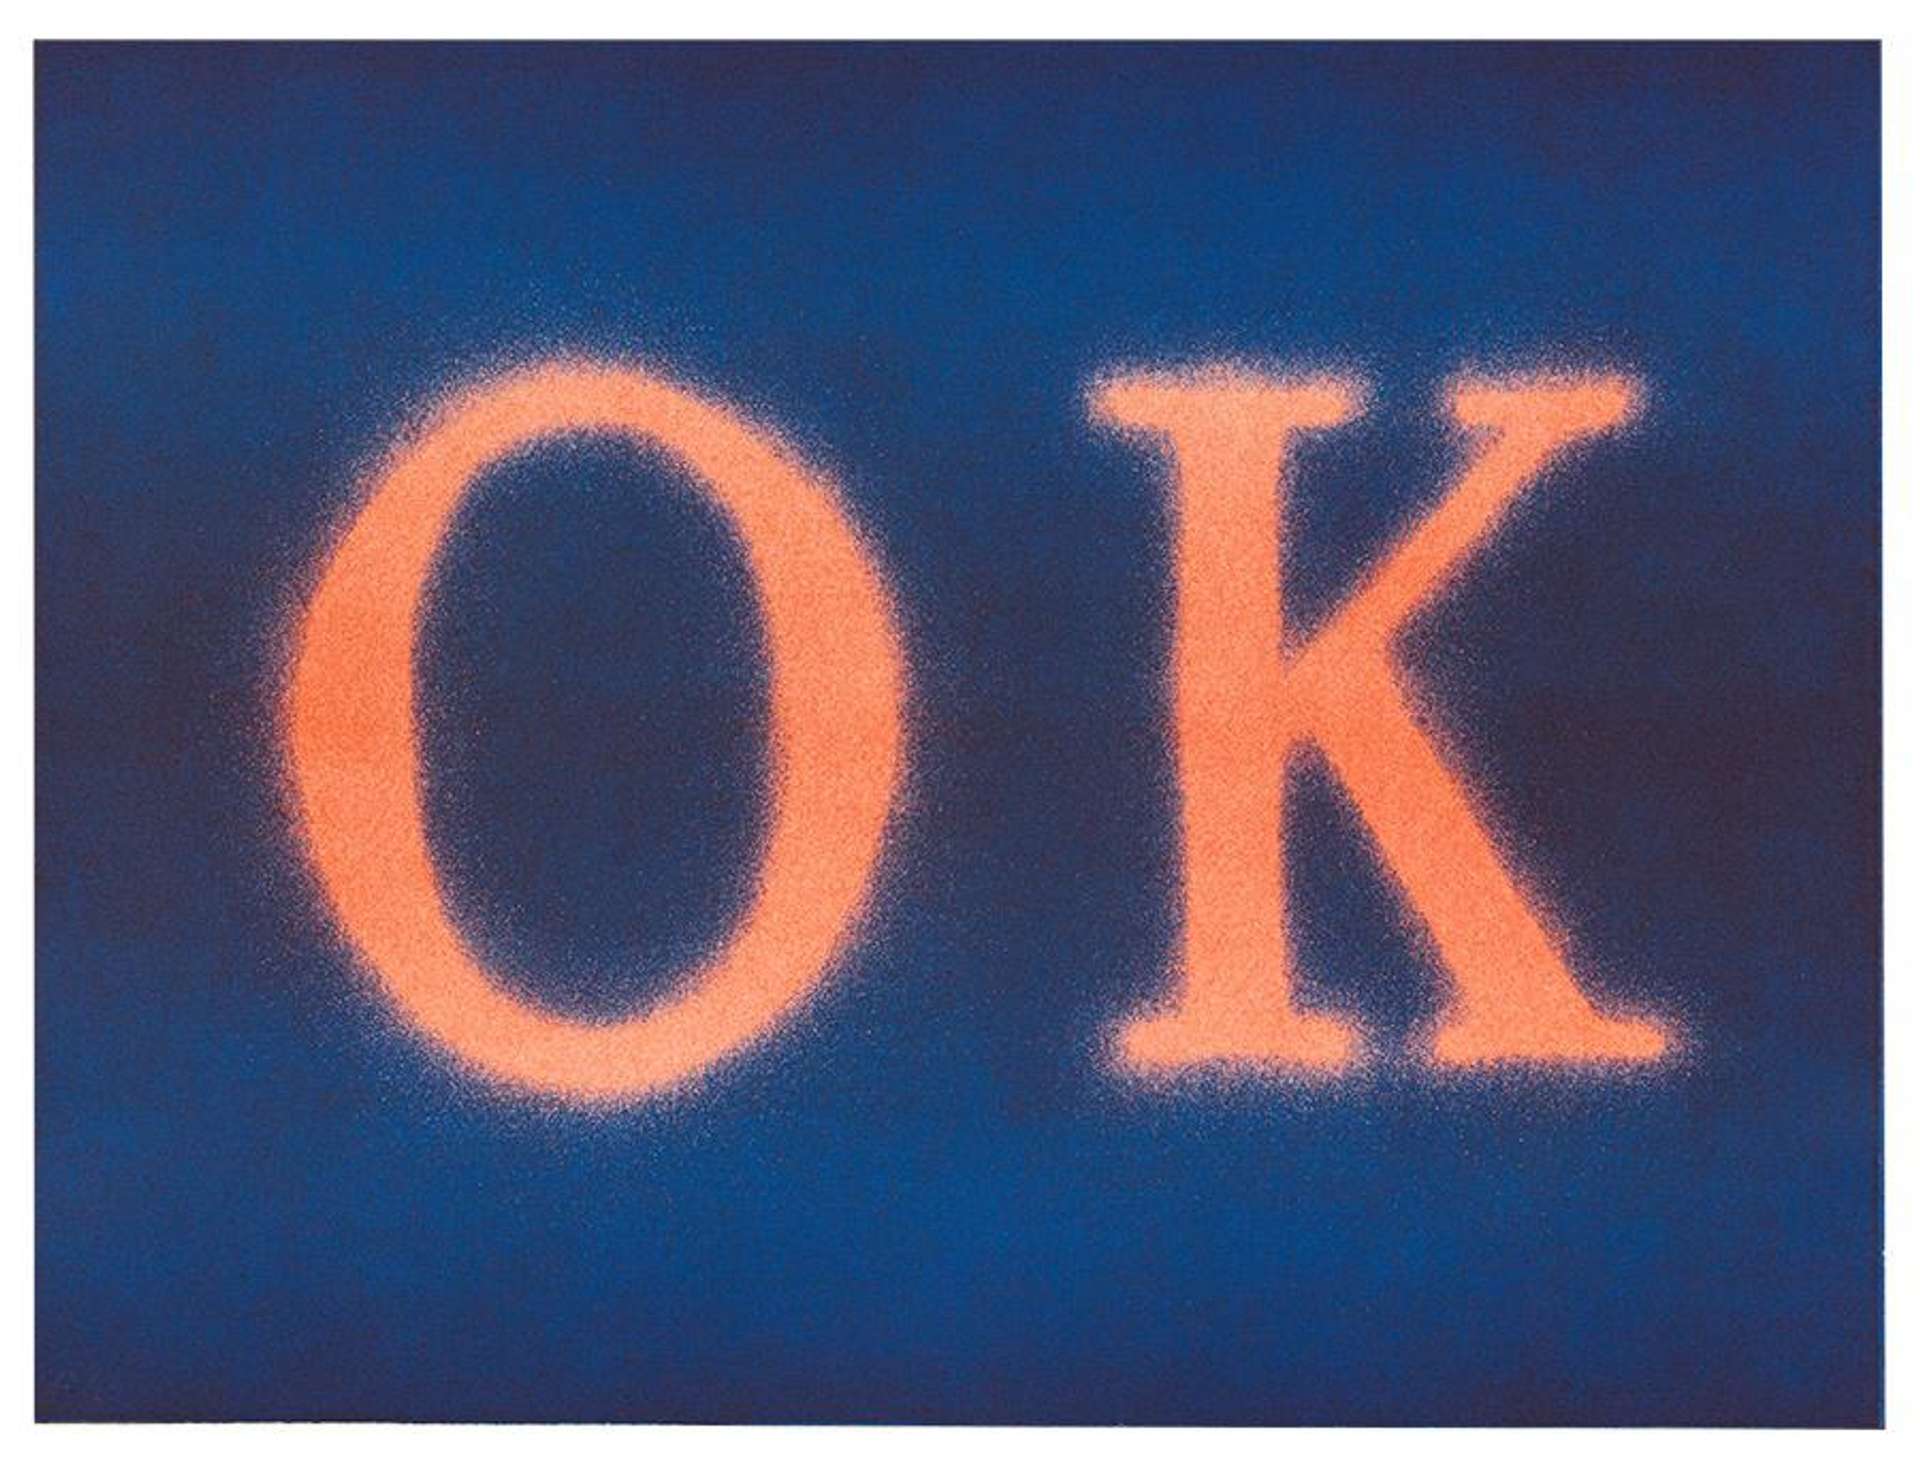 Lithograph by Ed Ruscha with the depicting the word 'OK' in large, orange letters, set against a deep blue background.